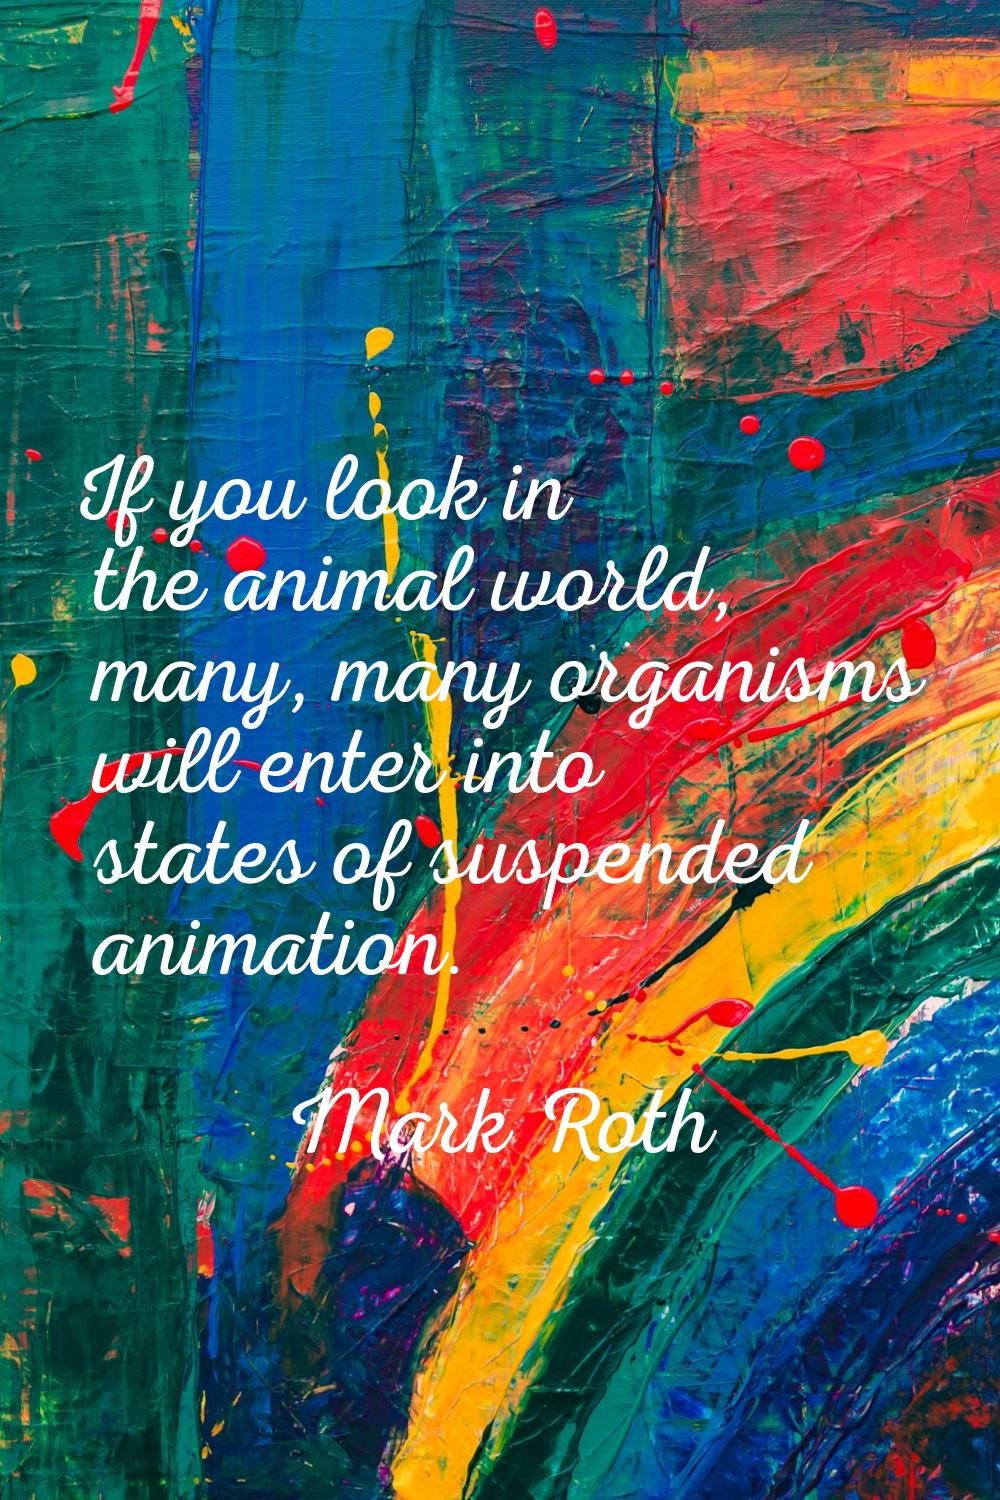 If you look in the animal world, many, many organisms will enter into states of suspended animation